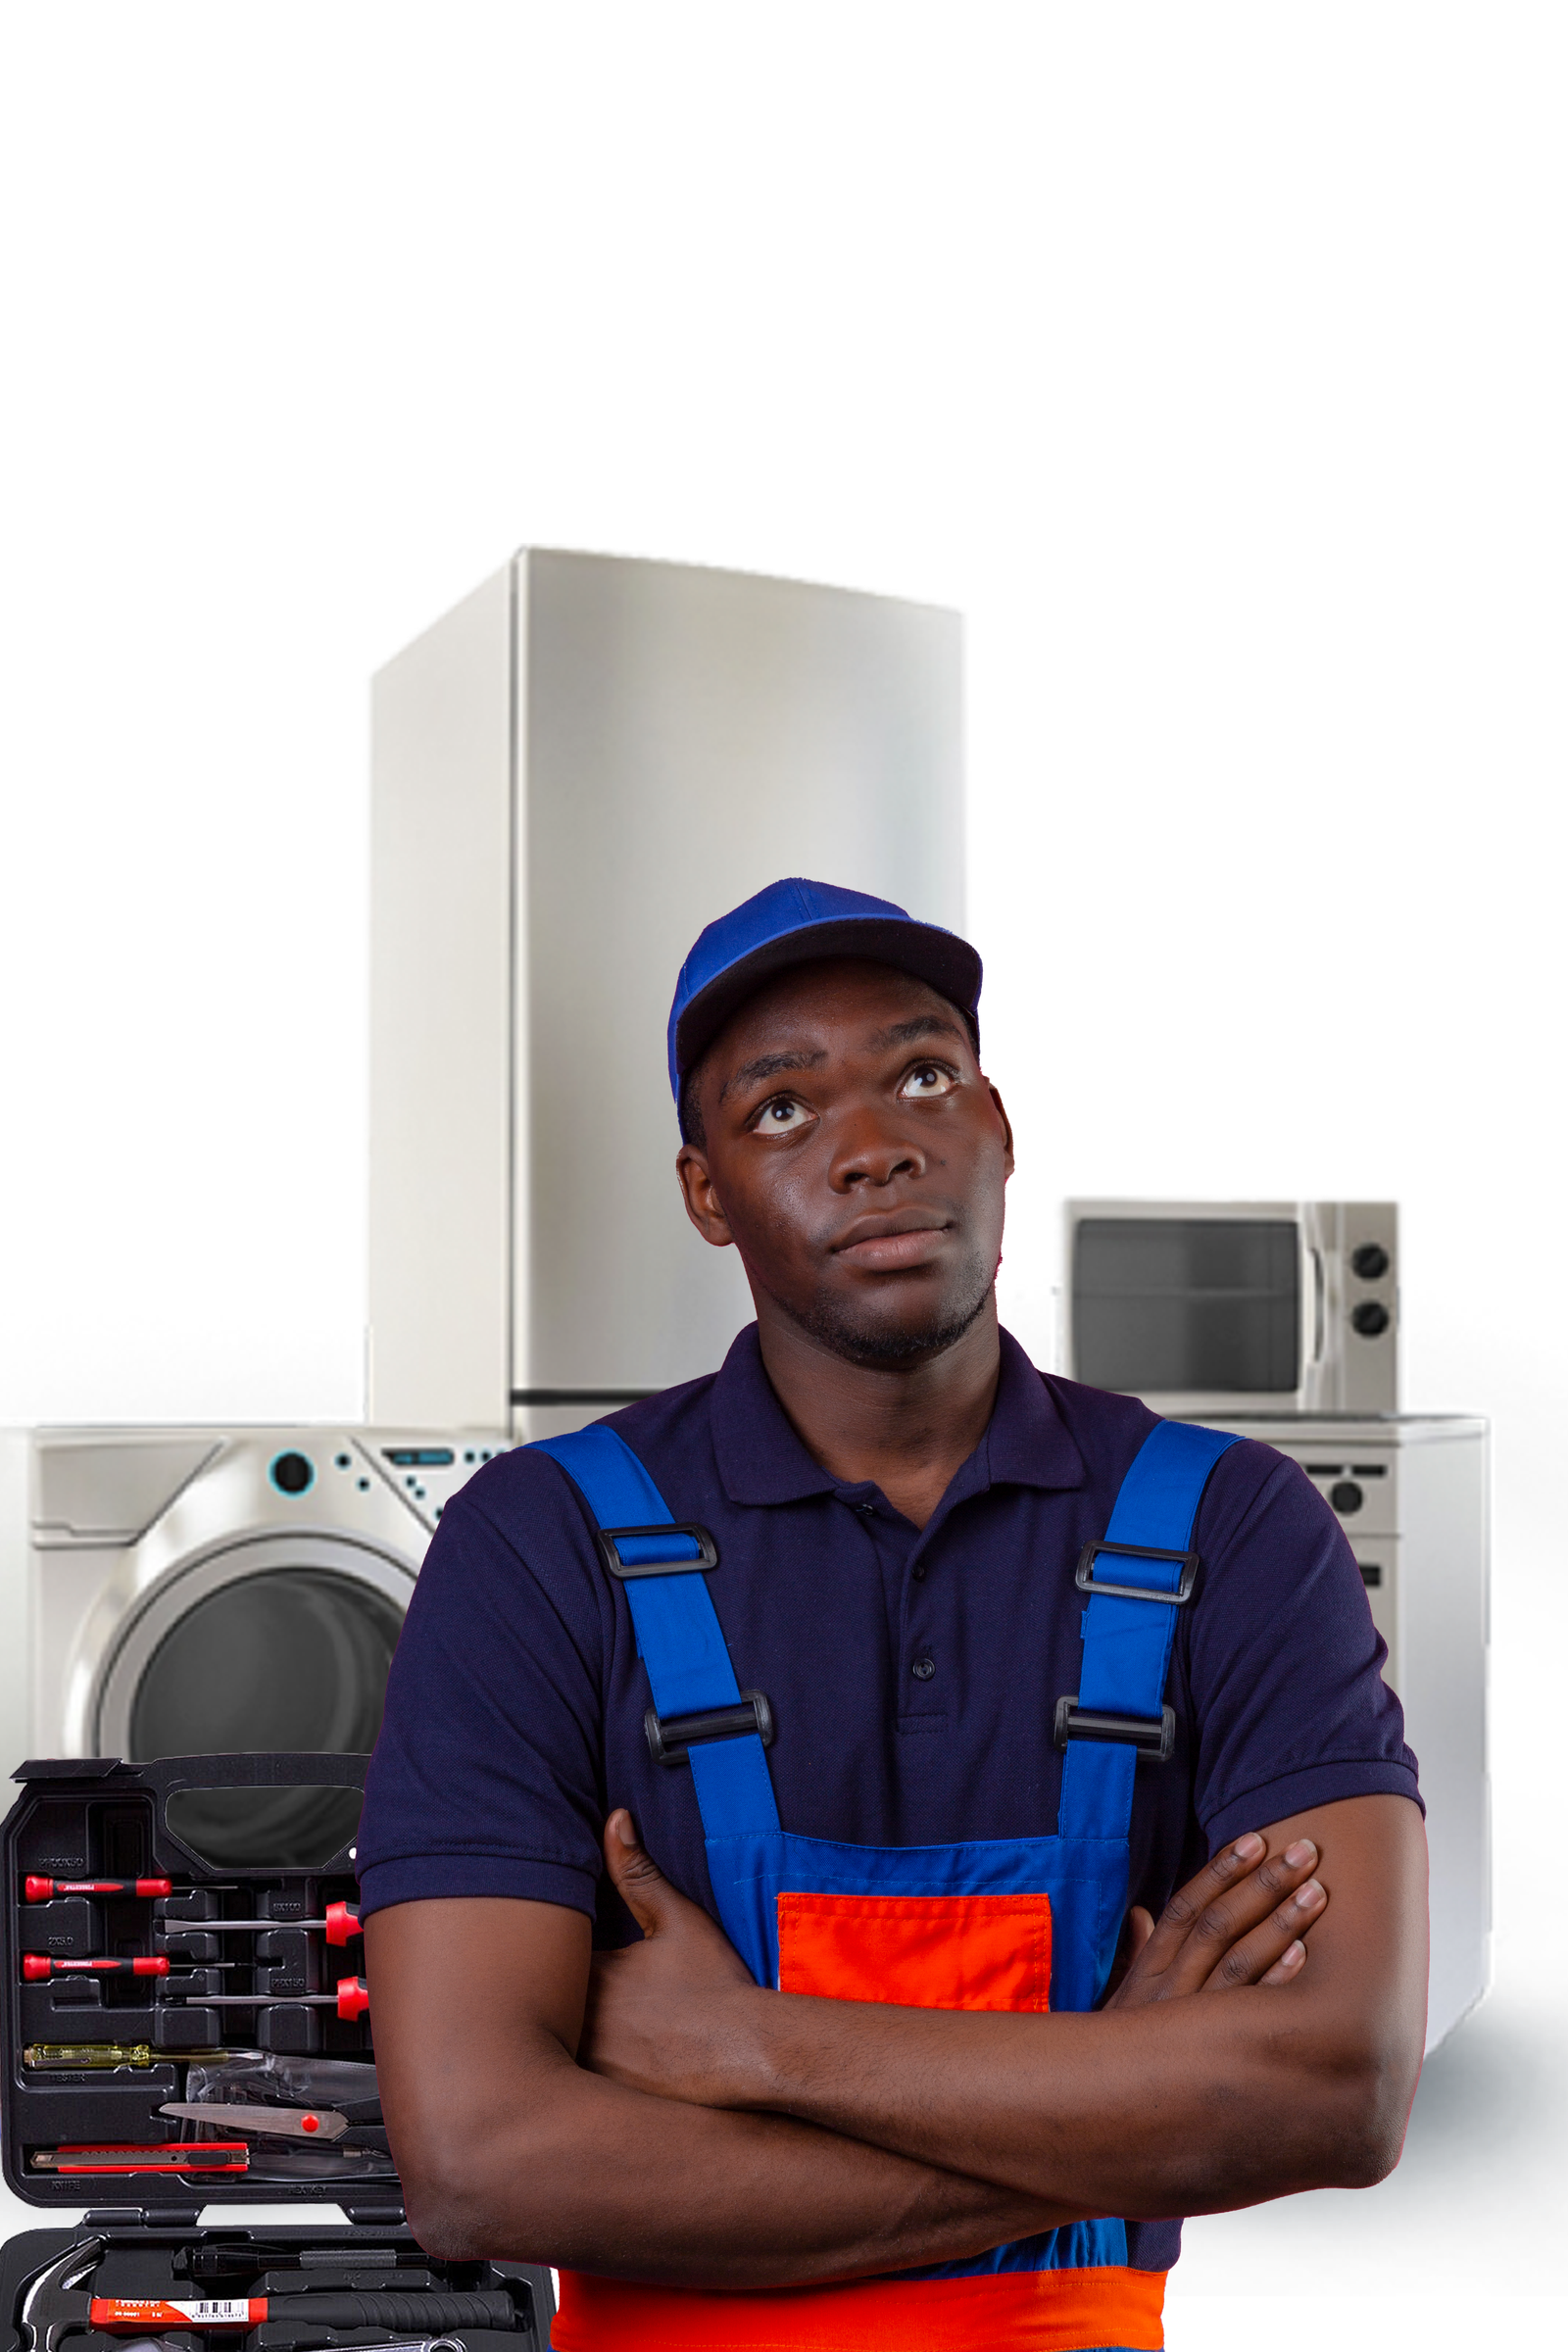 About Us Appliance Repair